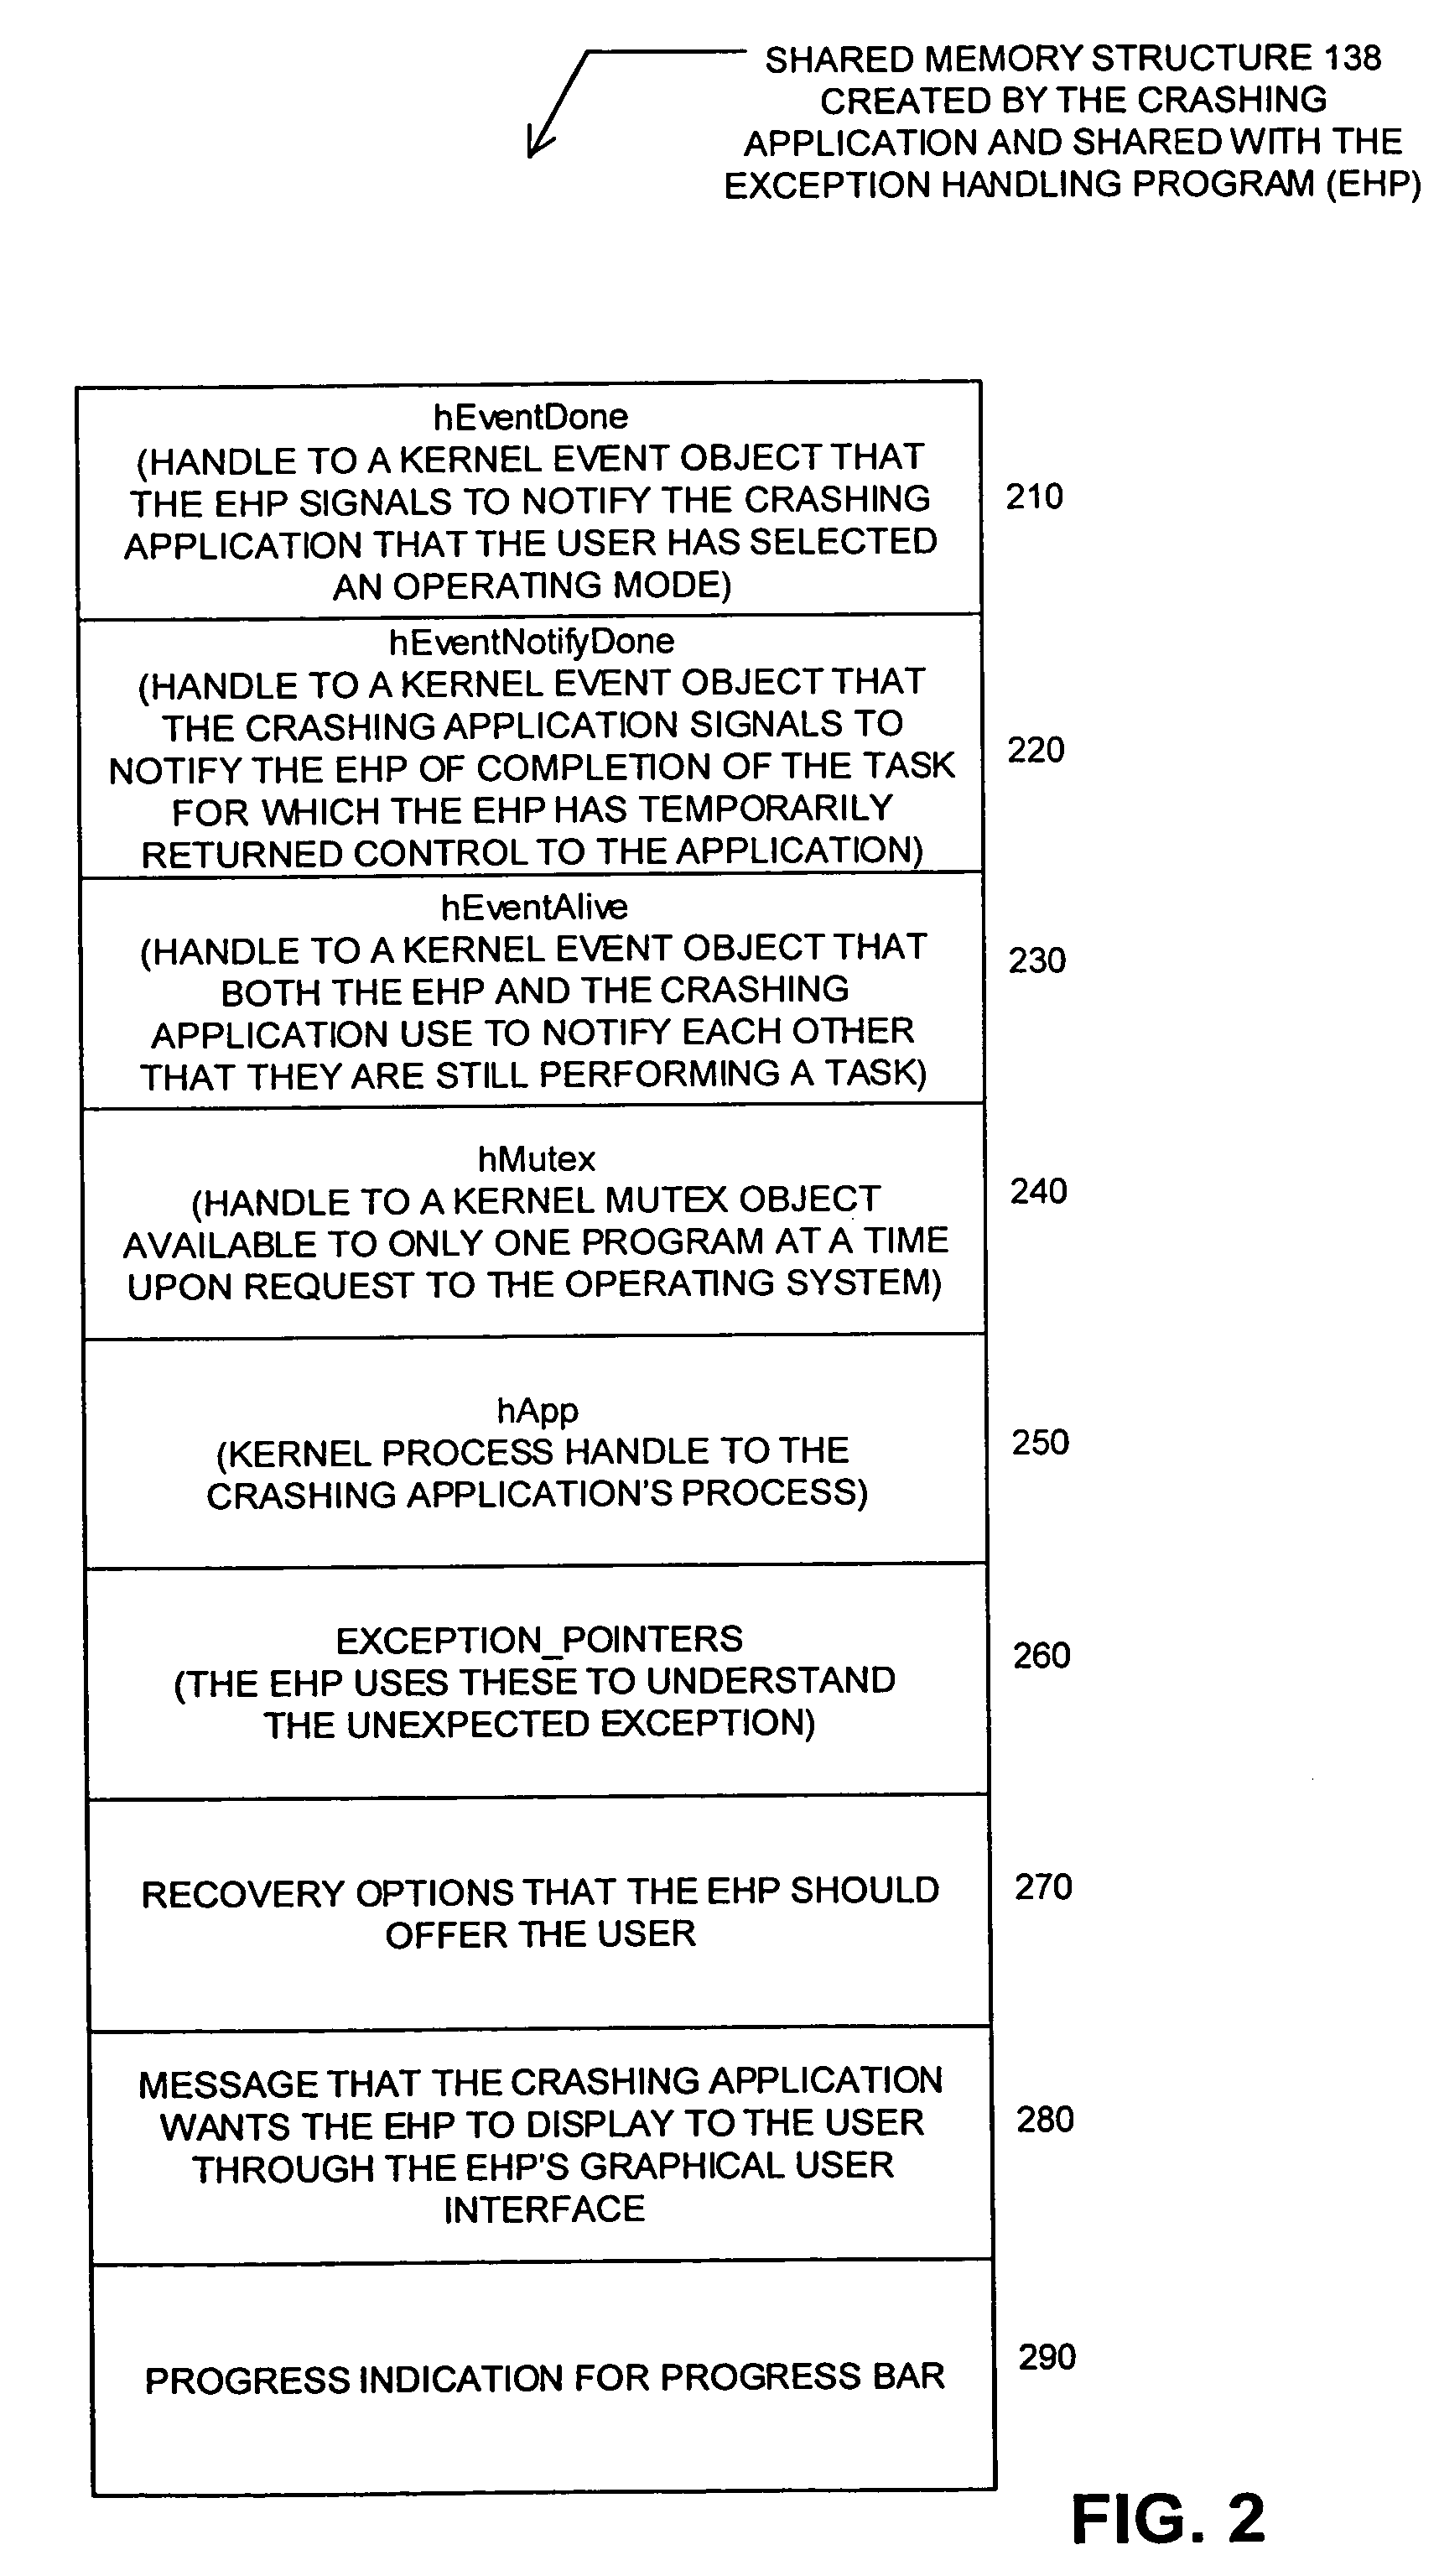 Method and system for handling an unexpected exception generated by an application